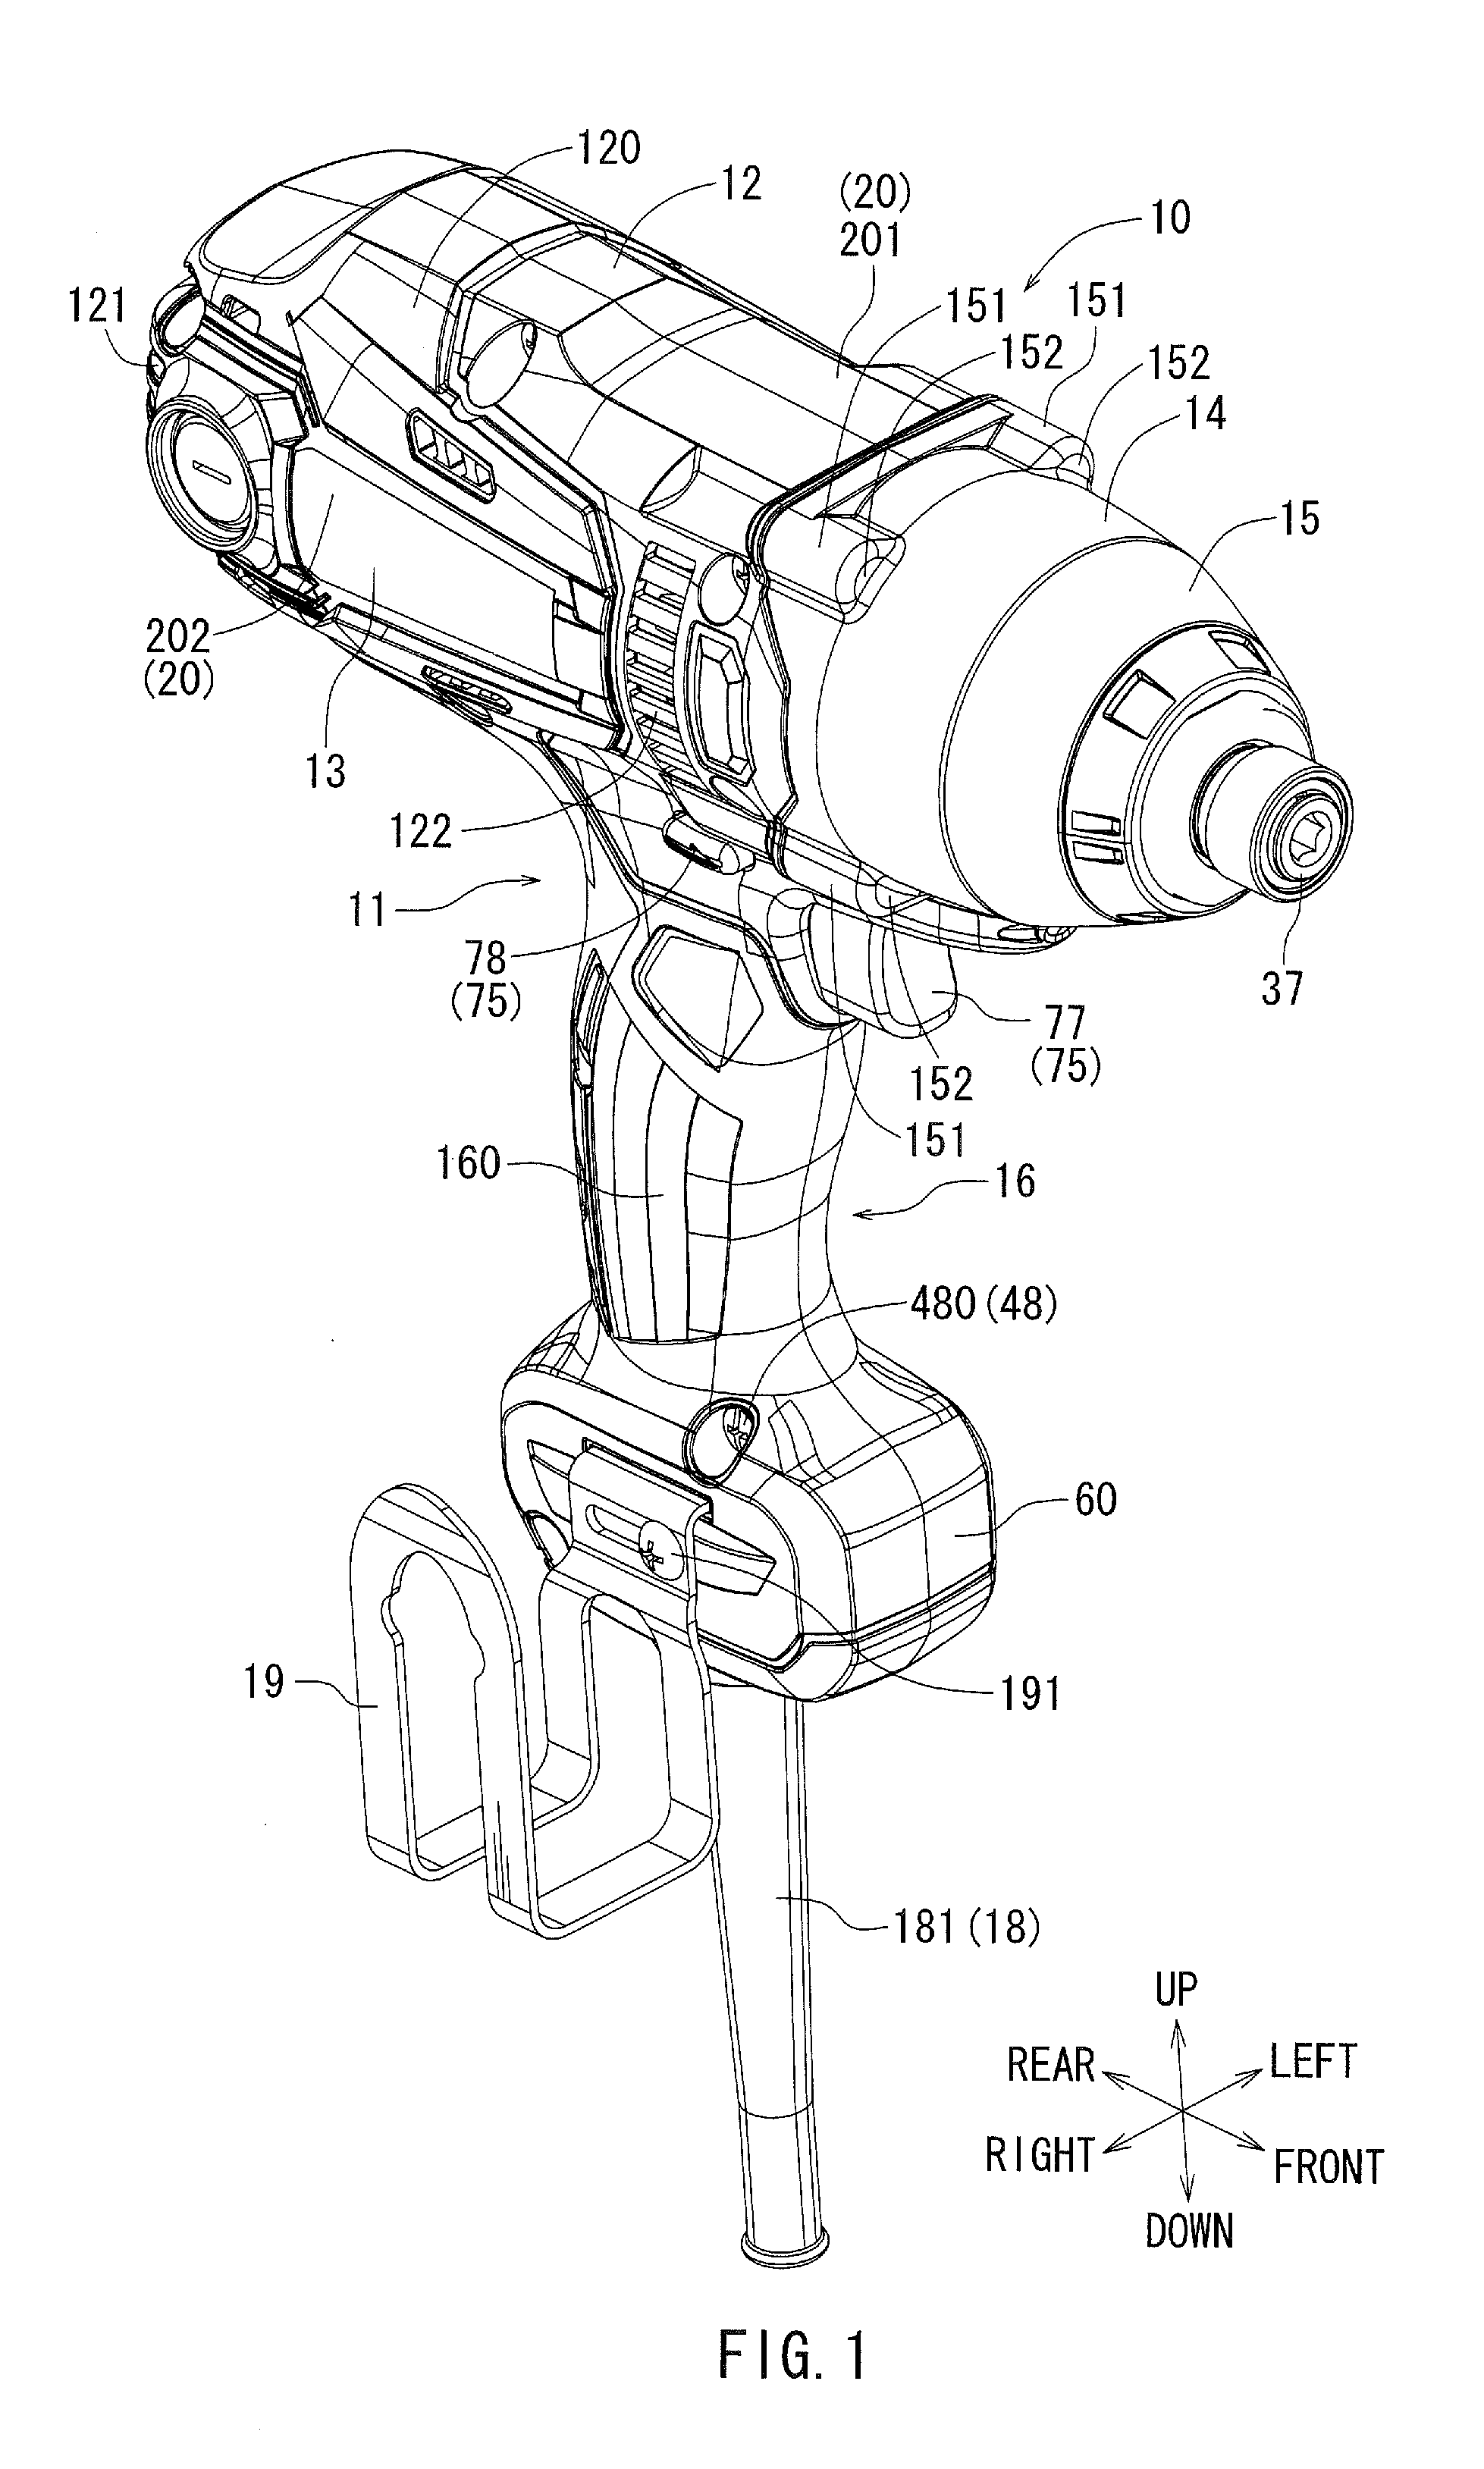 Electric power tool